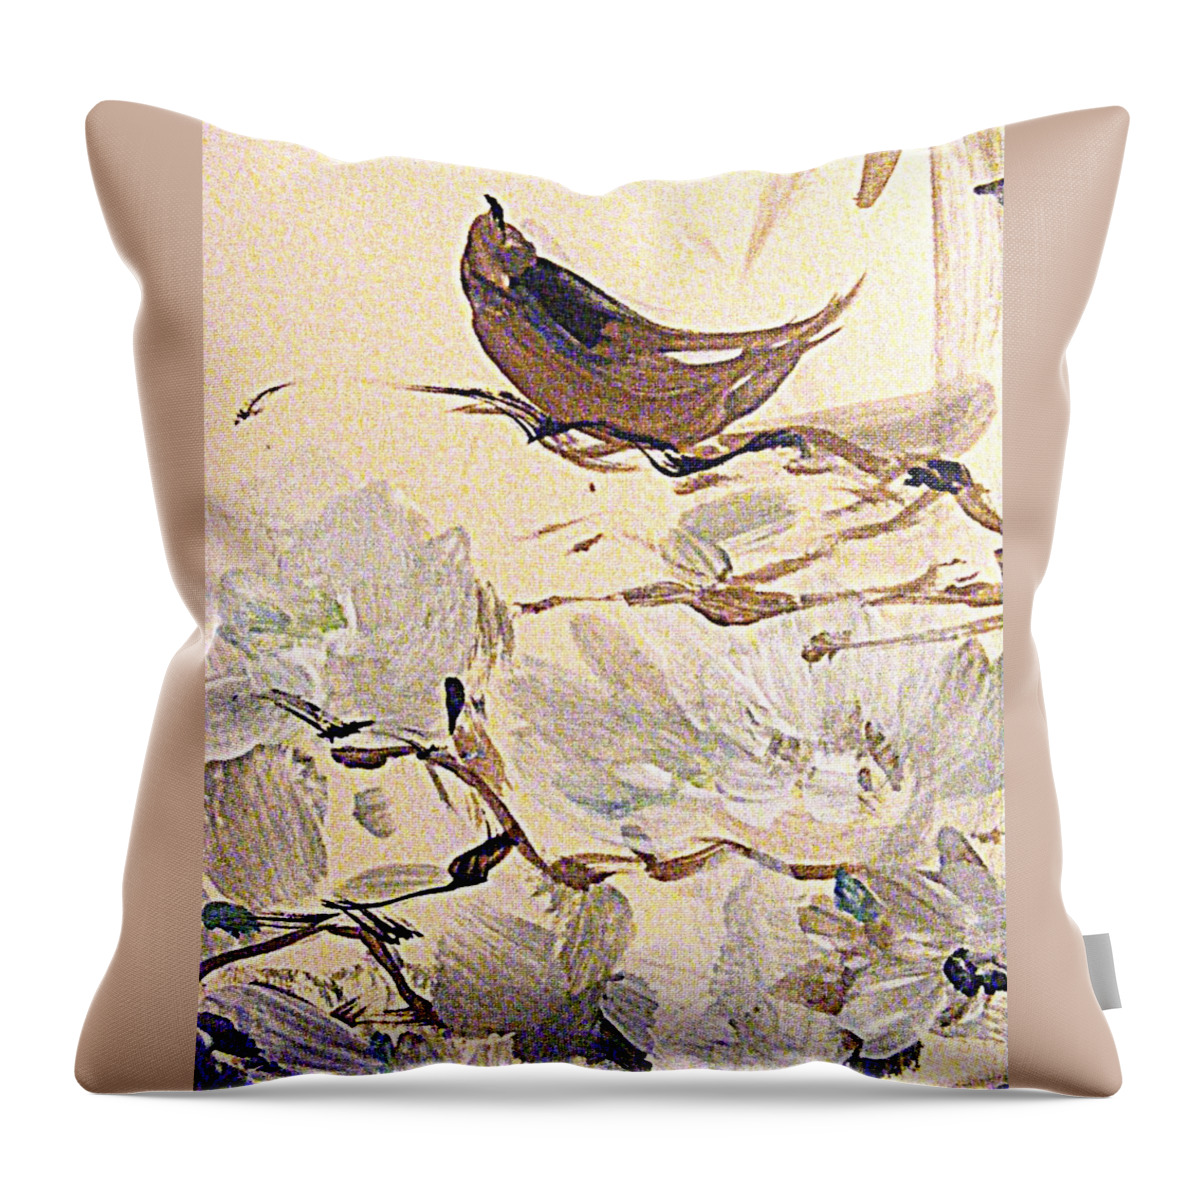 Abstract Bird And Flowers In Gouache Throw Pillow featuring the painting Looking So Pretty by Nancy Kane Chapman